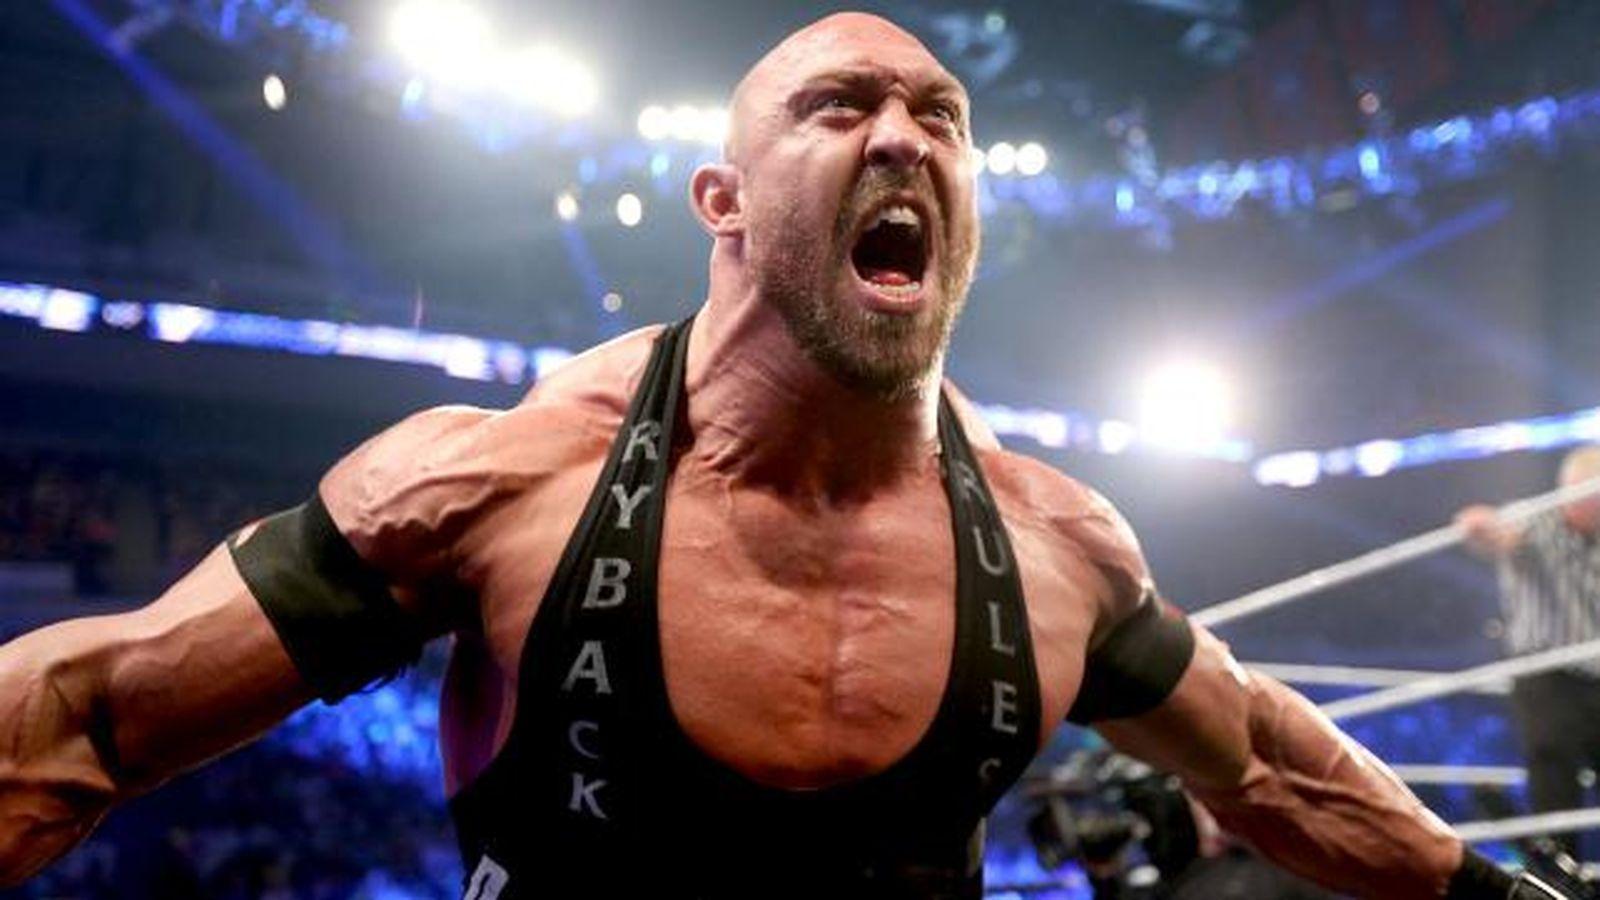 Ryback details another time Vince McMahon lied to him